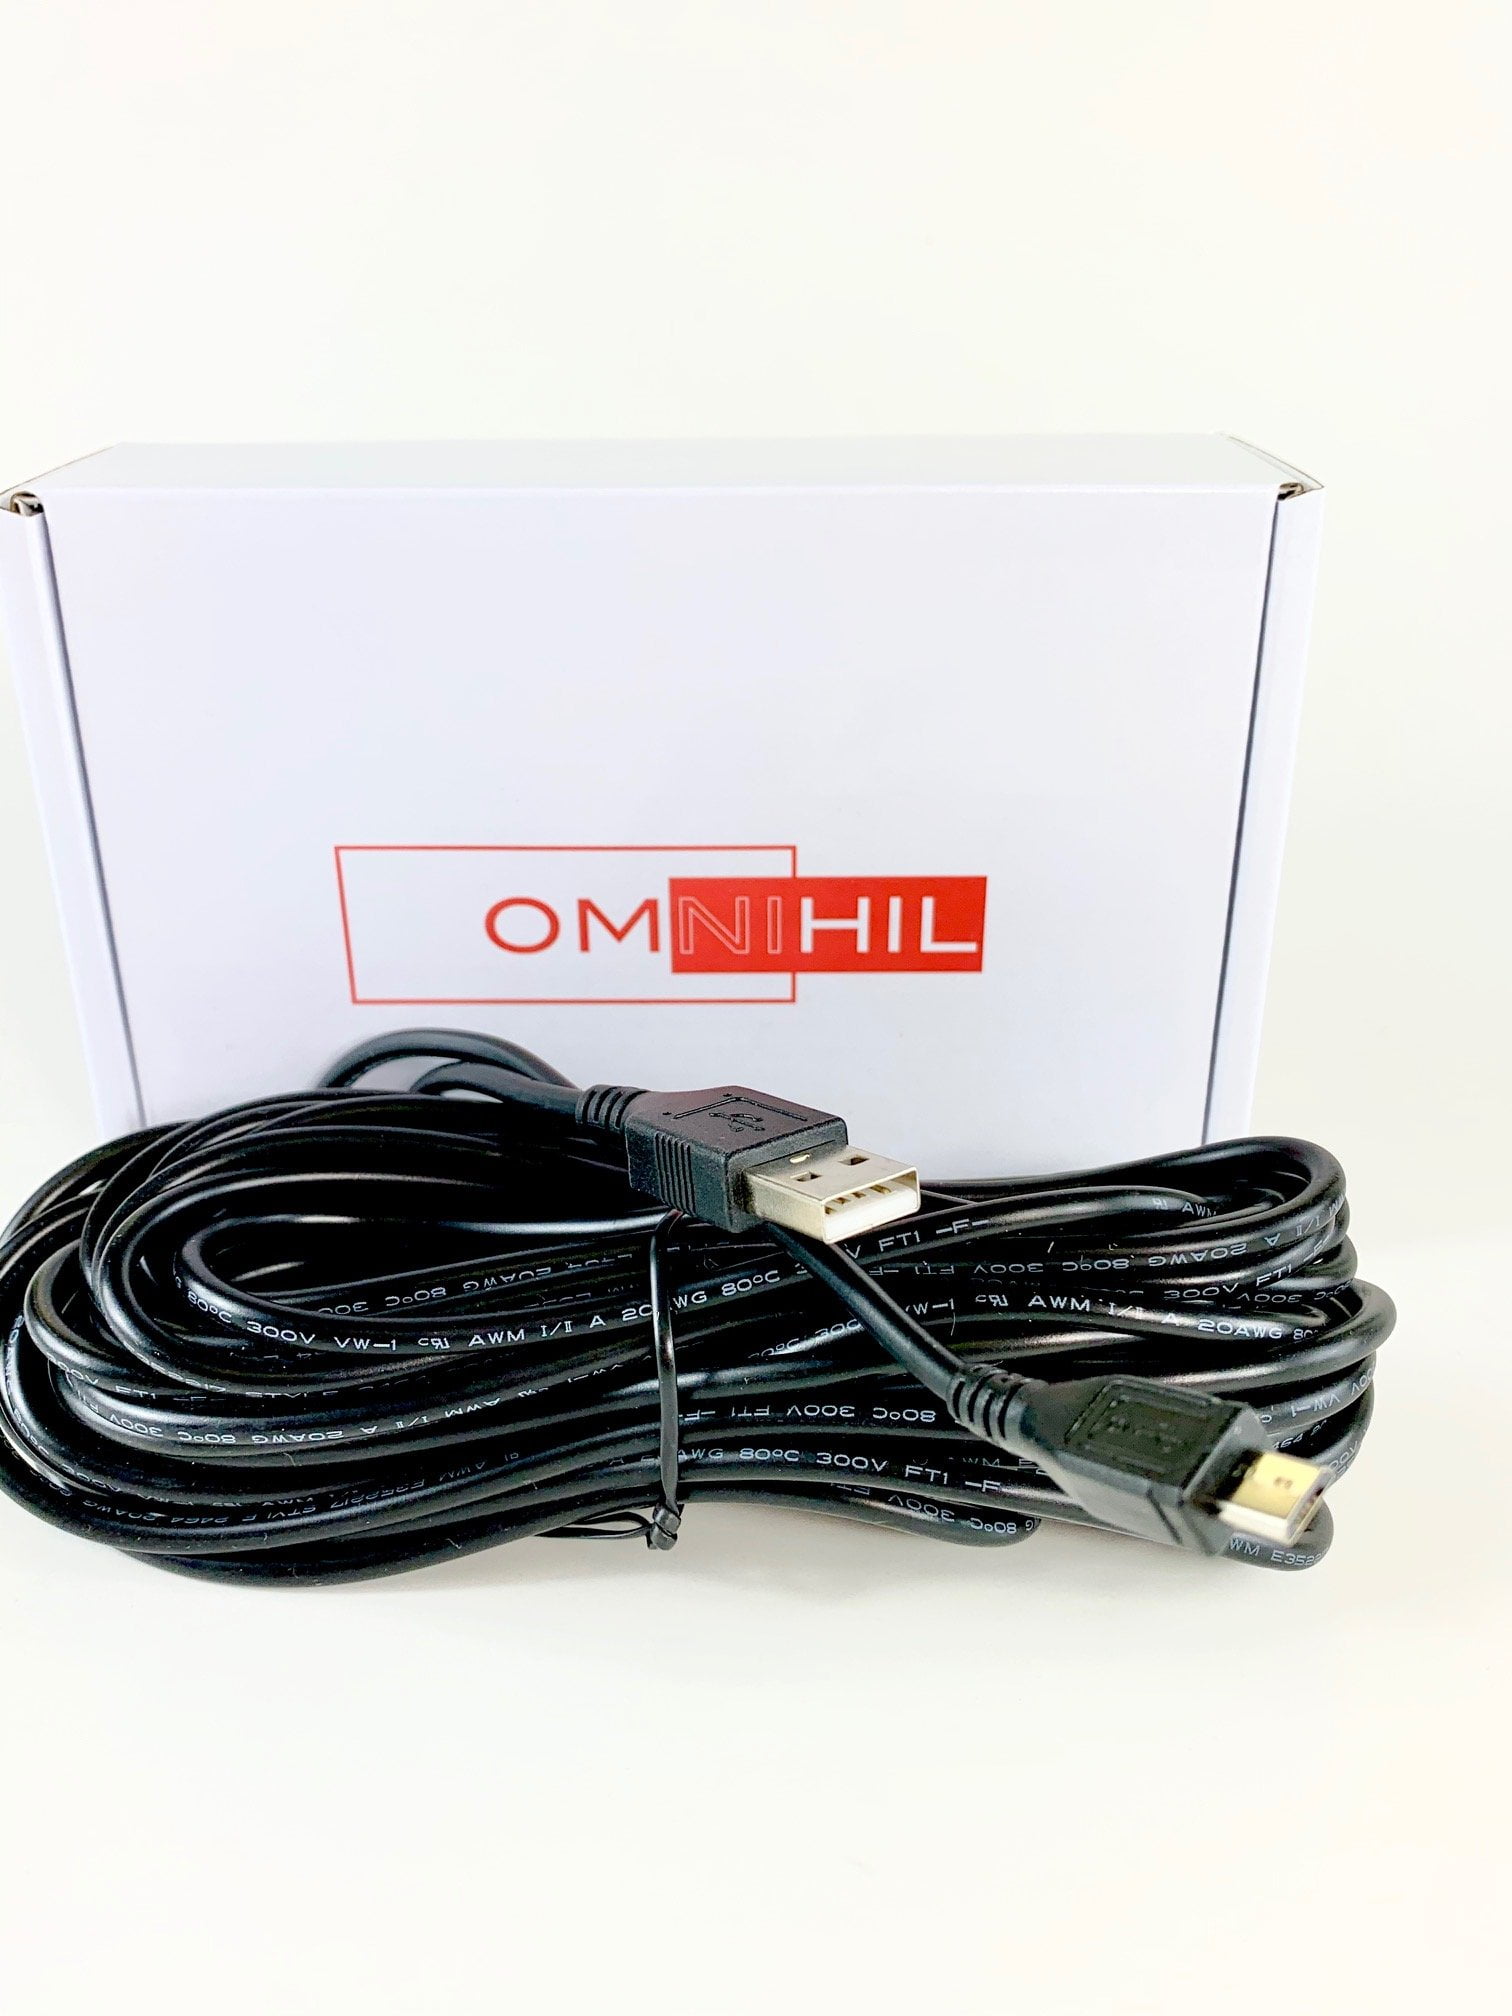 OMNIHIL White 30 Feet Long High Speed USB 2.0 Cable Compatible with Godox Mobile Phone Video Light-LEDM150